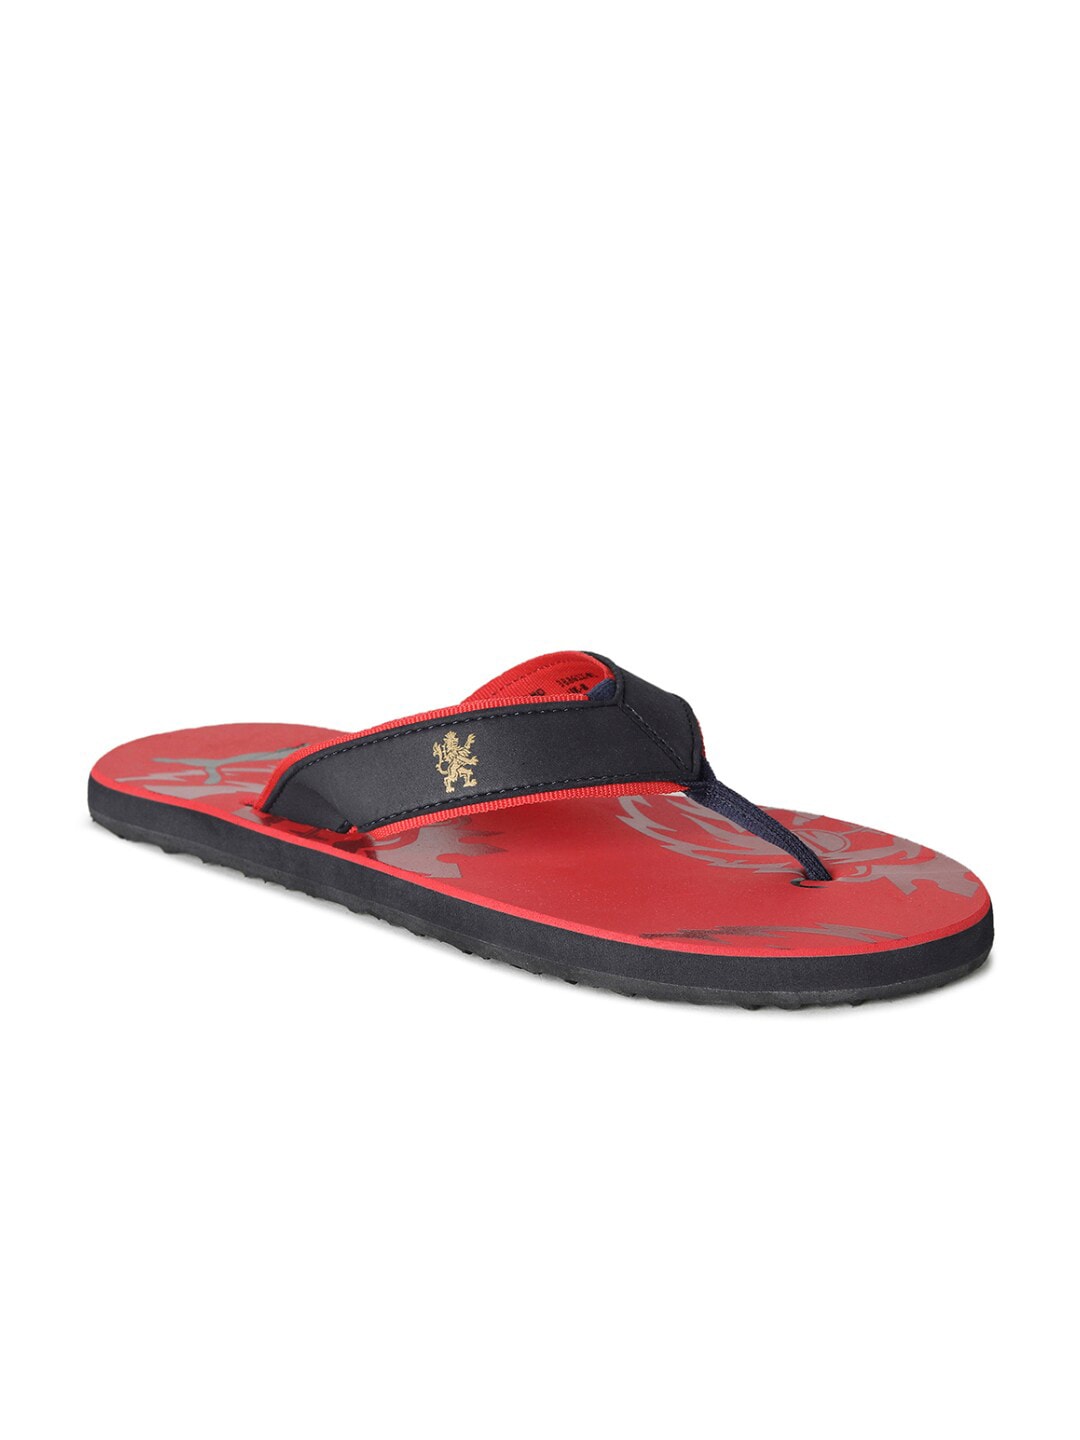 Puma Unsex Red Royal Challengers Bangalore Printed Flip Flops Price in India